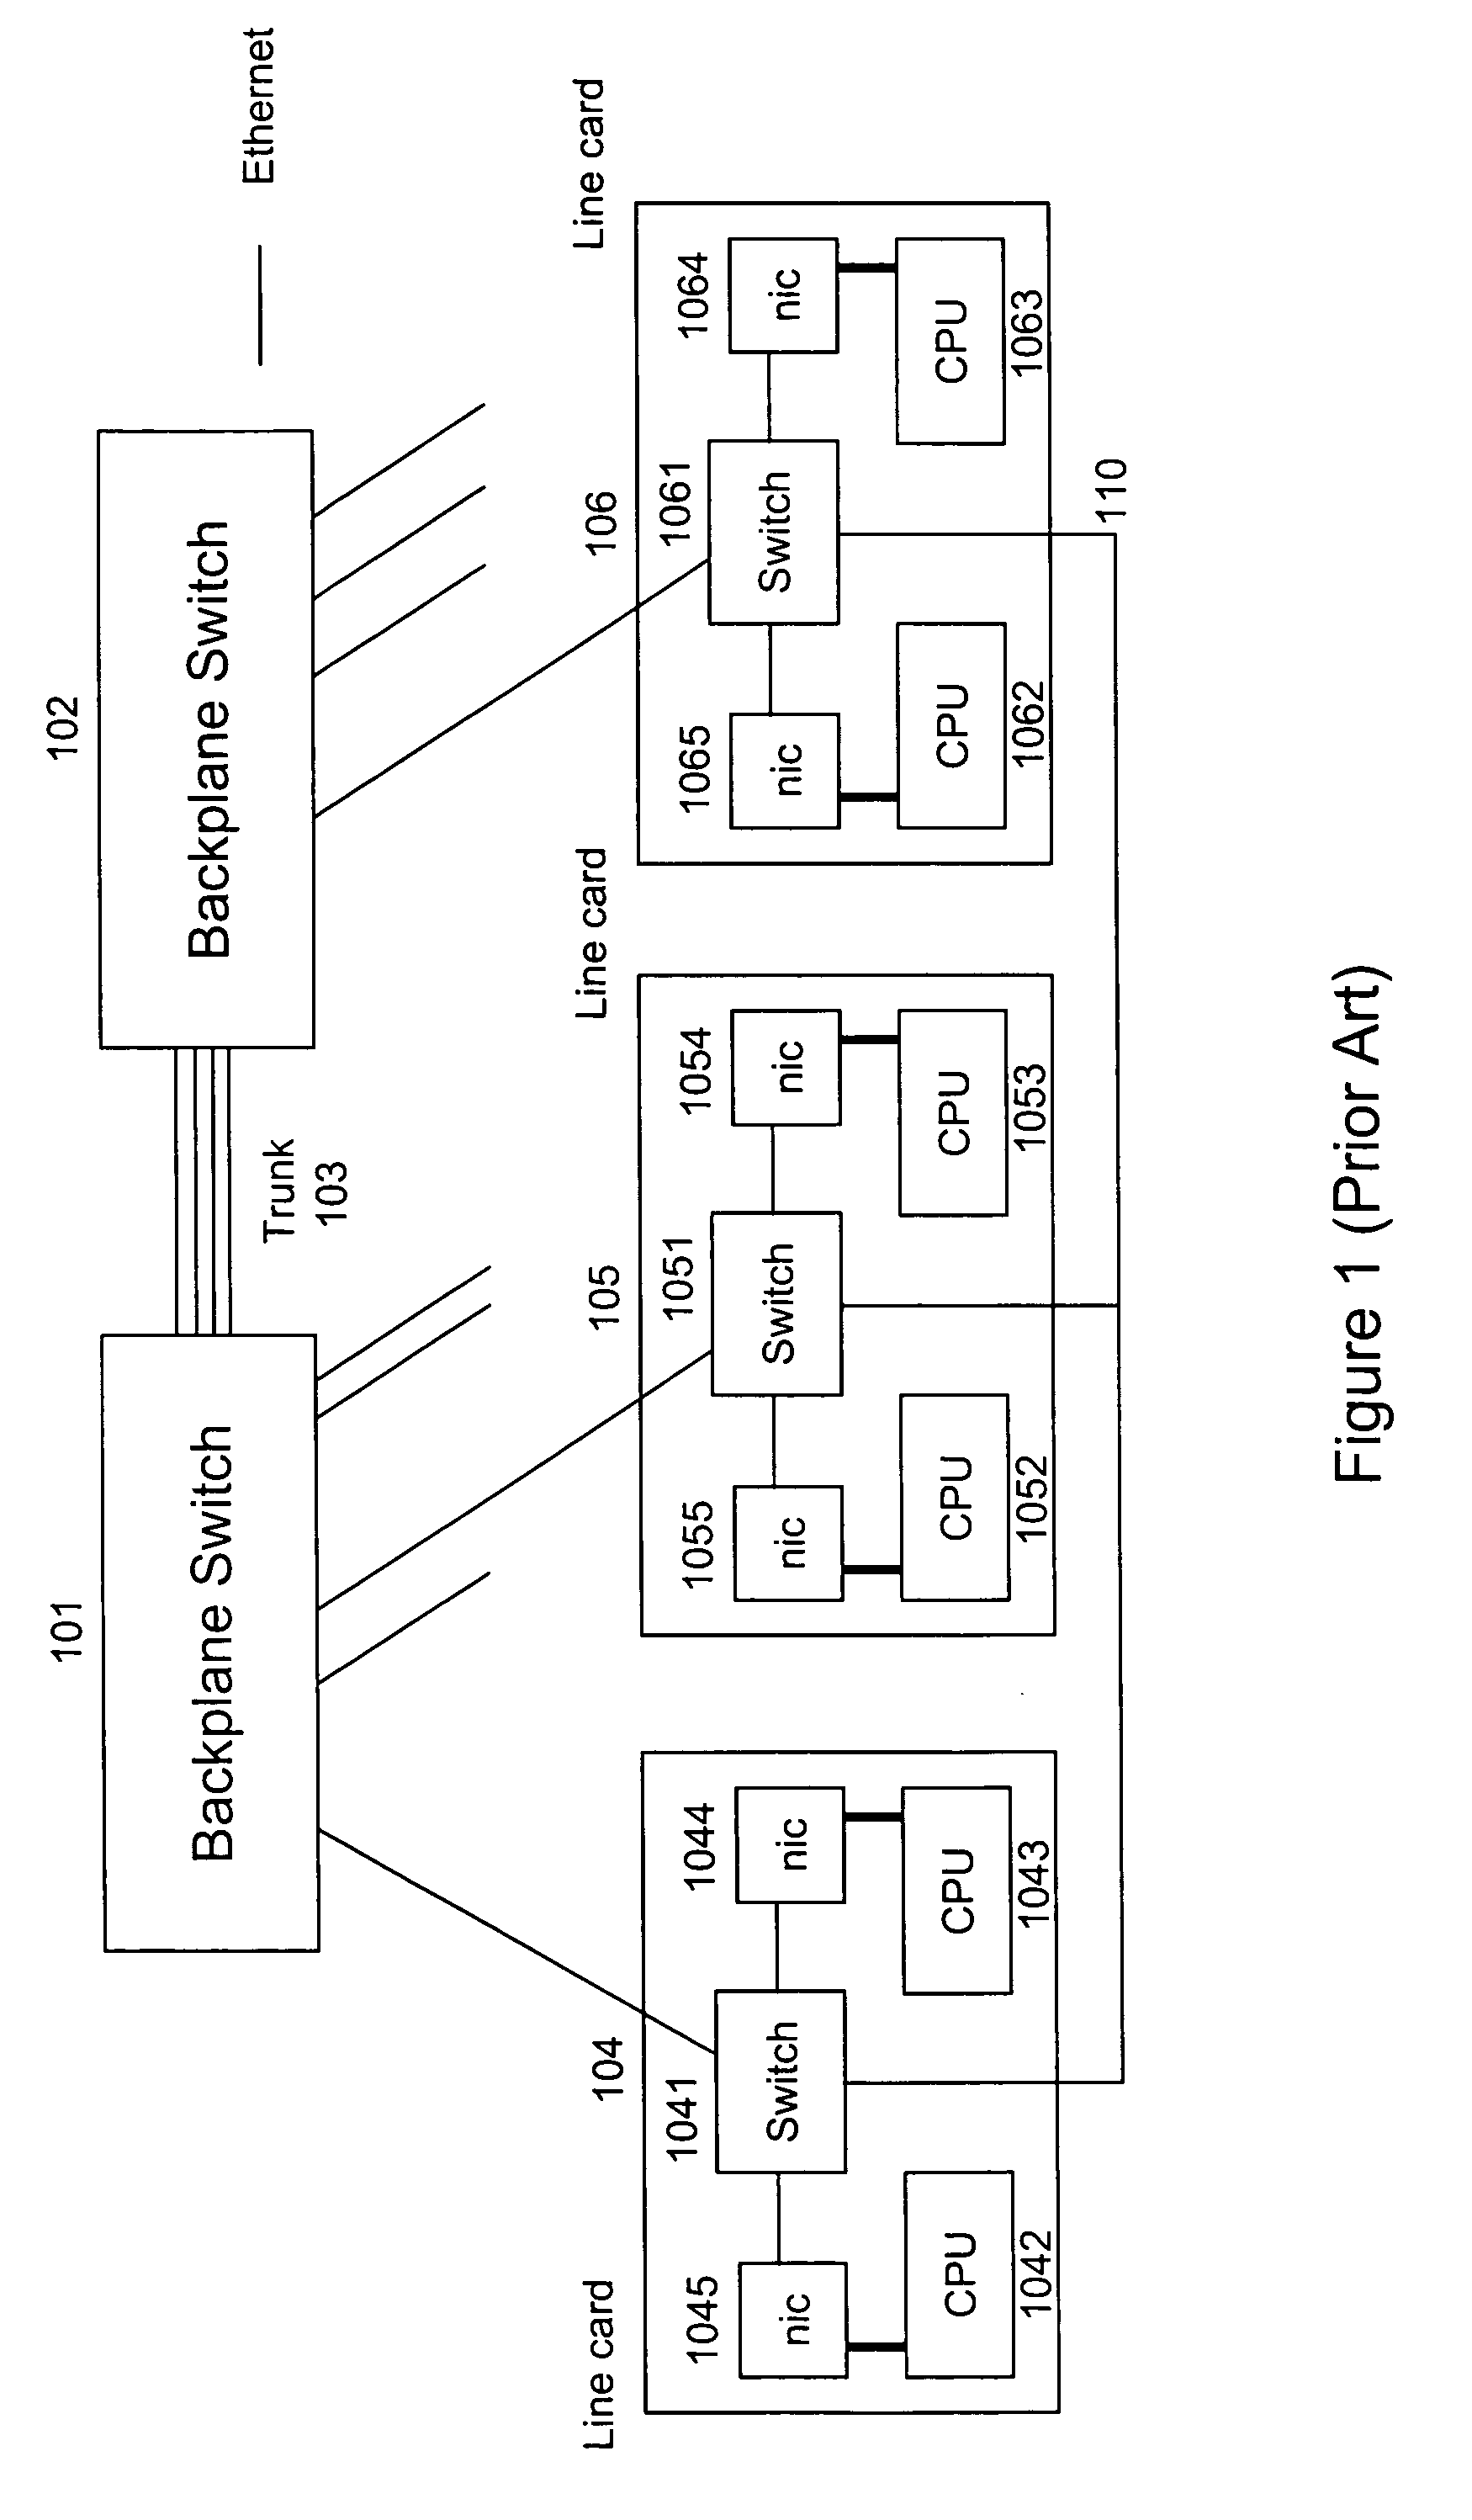 Method and apparatus for preventing head of line blocking among ethernet switches